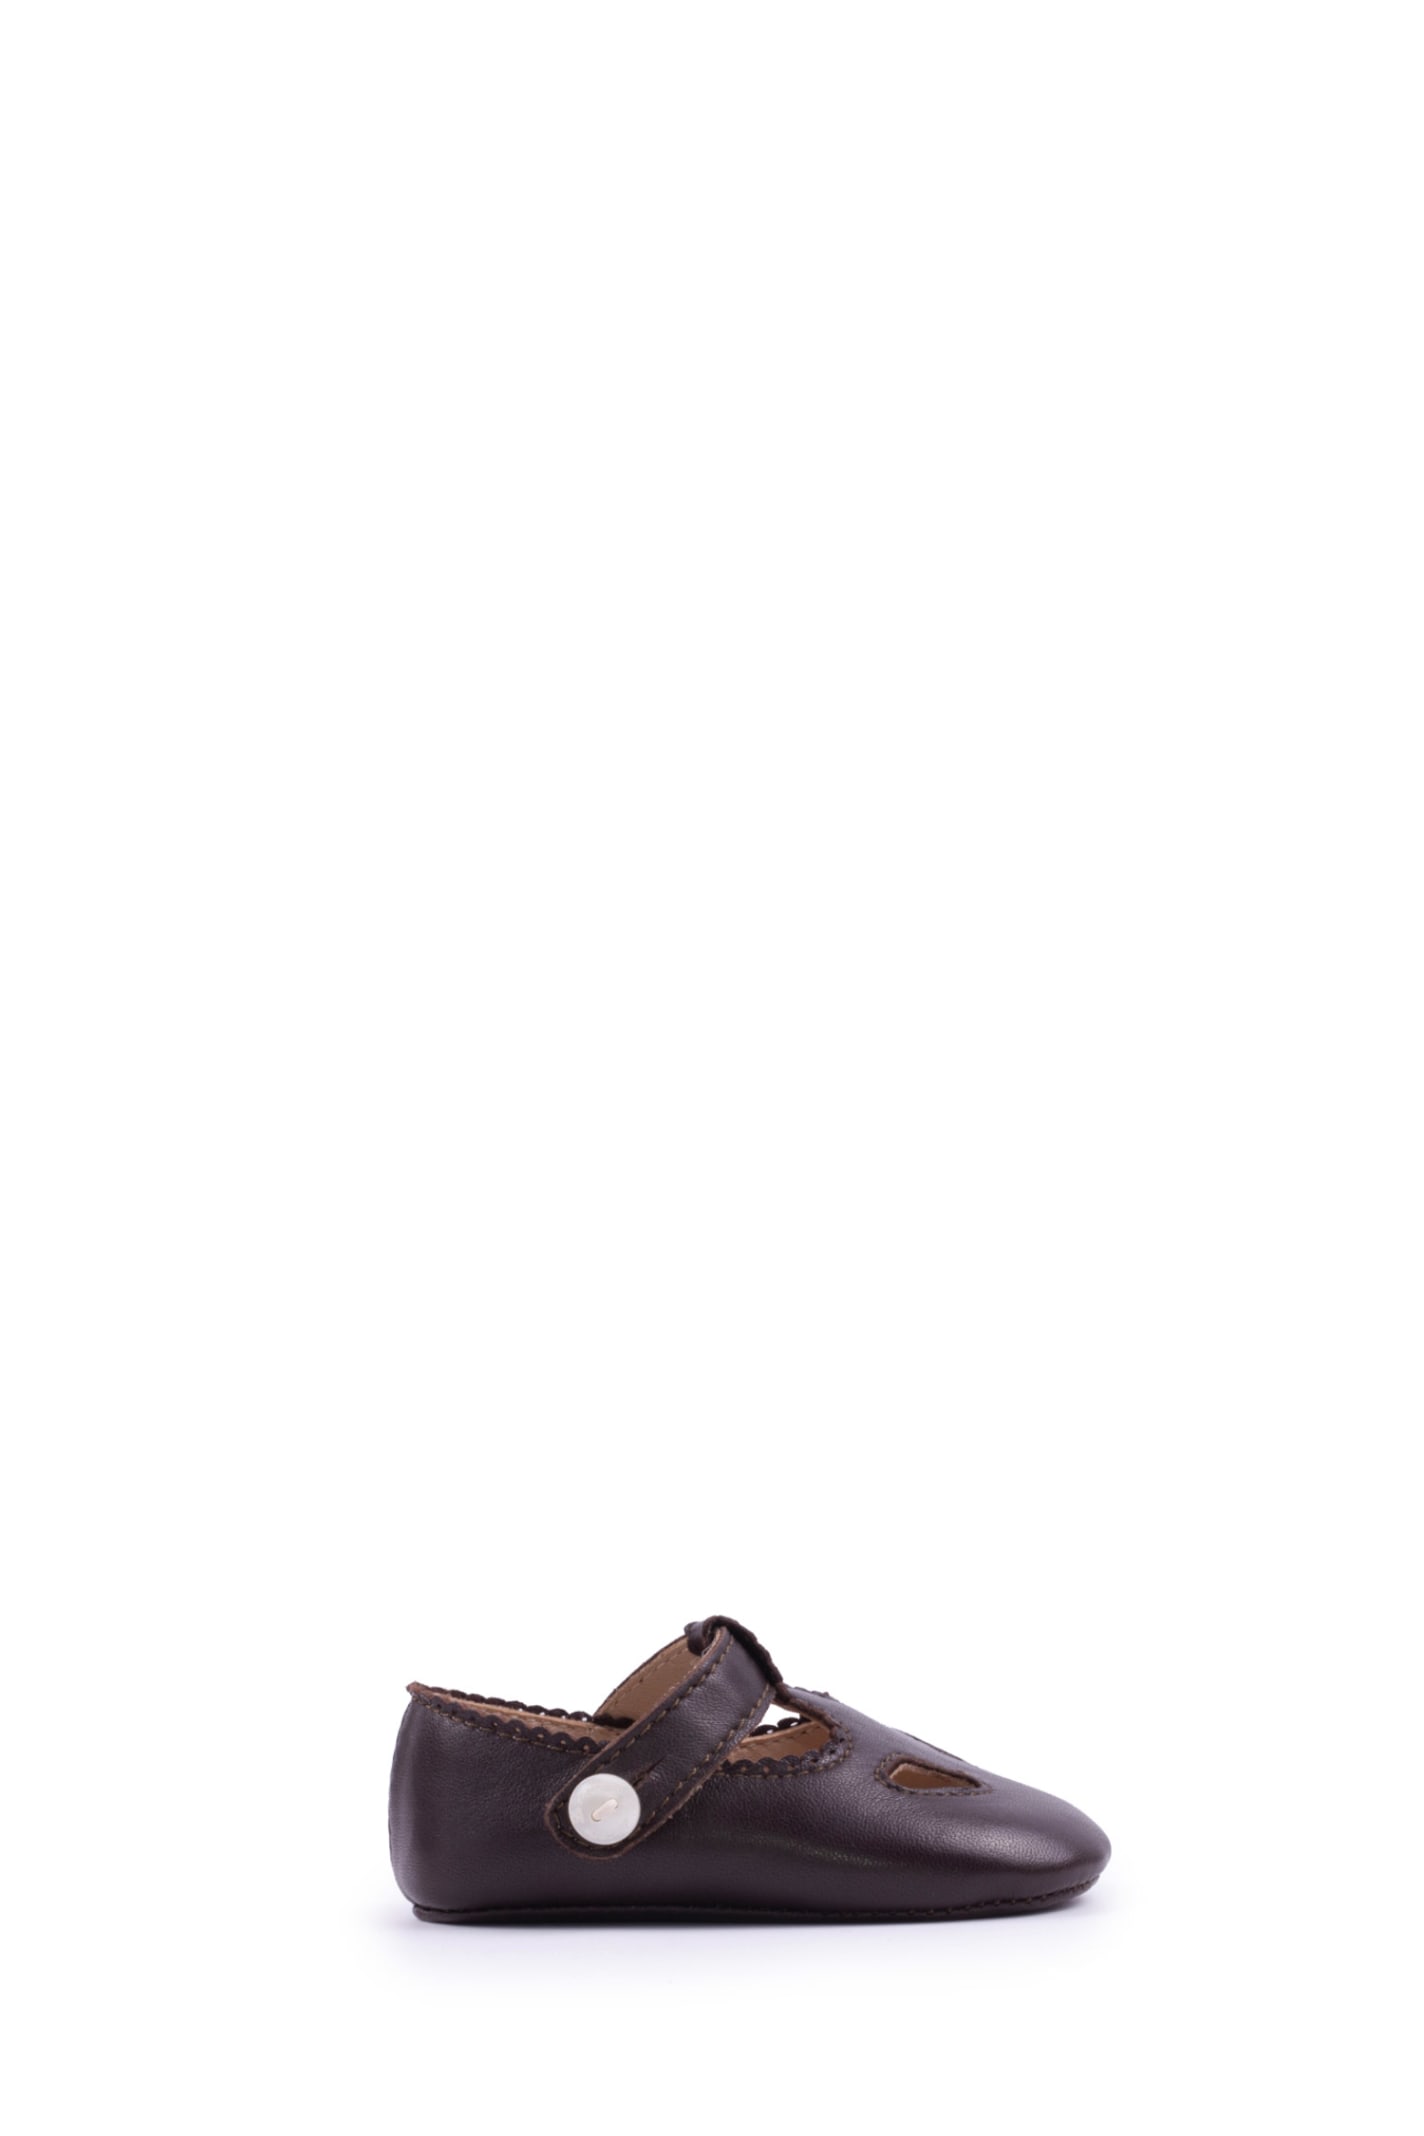 La Stupenderia Kids' Leather Shoes In Brown